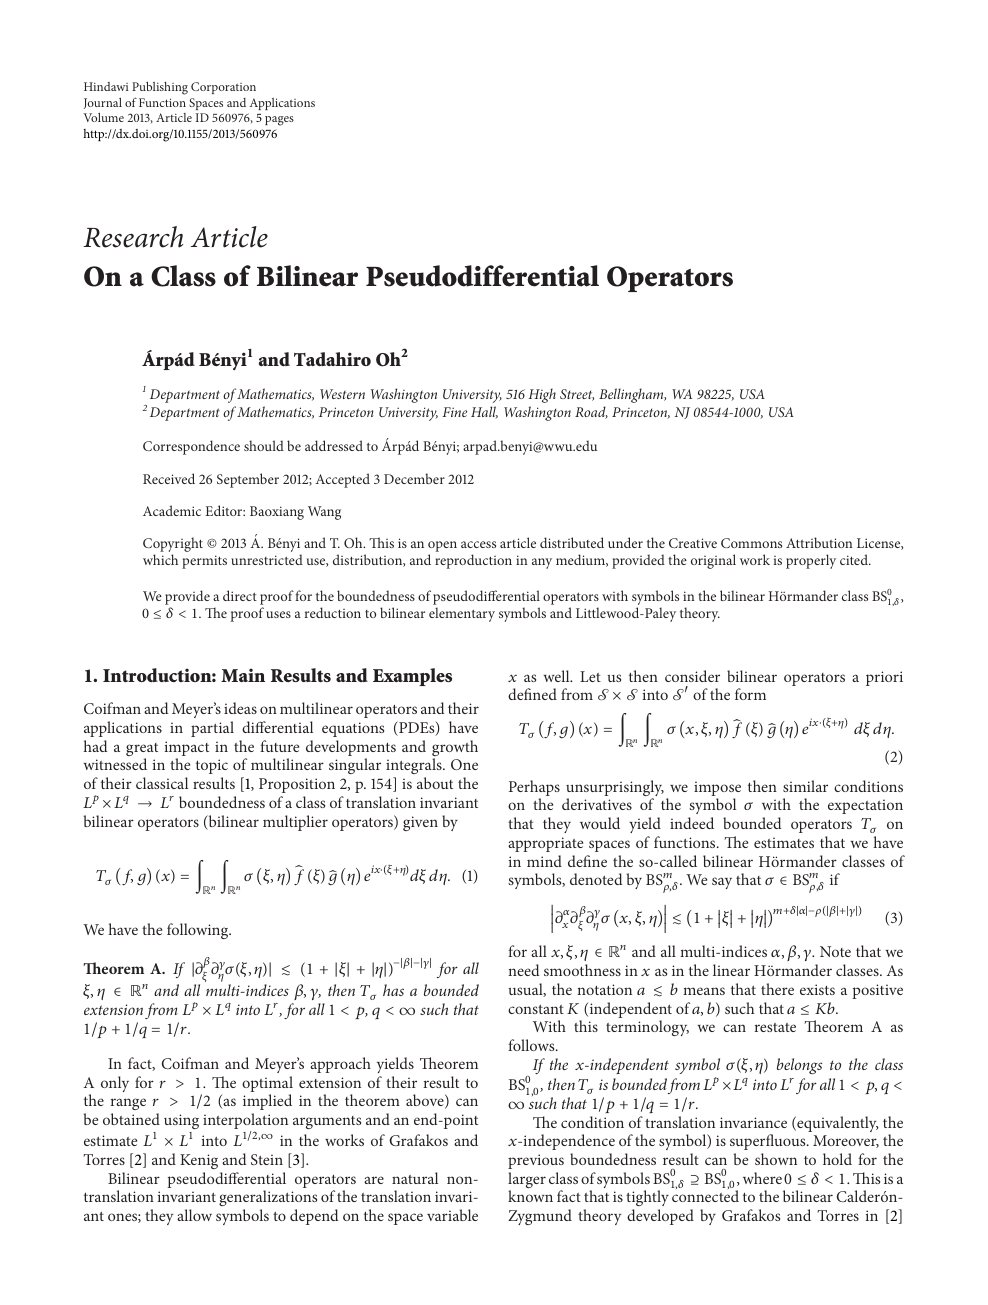 On A Class Of Bilinear Pseudodifferential Operators Topic Of Research Paper In Mathematics Download Scholarly Article Pdf And Read For Free On Cyberleninka Open Science Hub